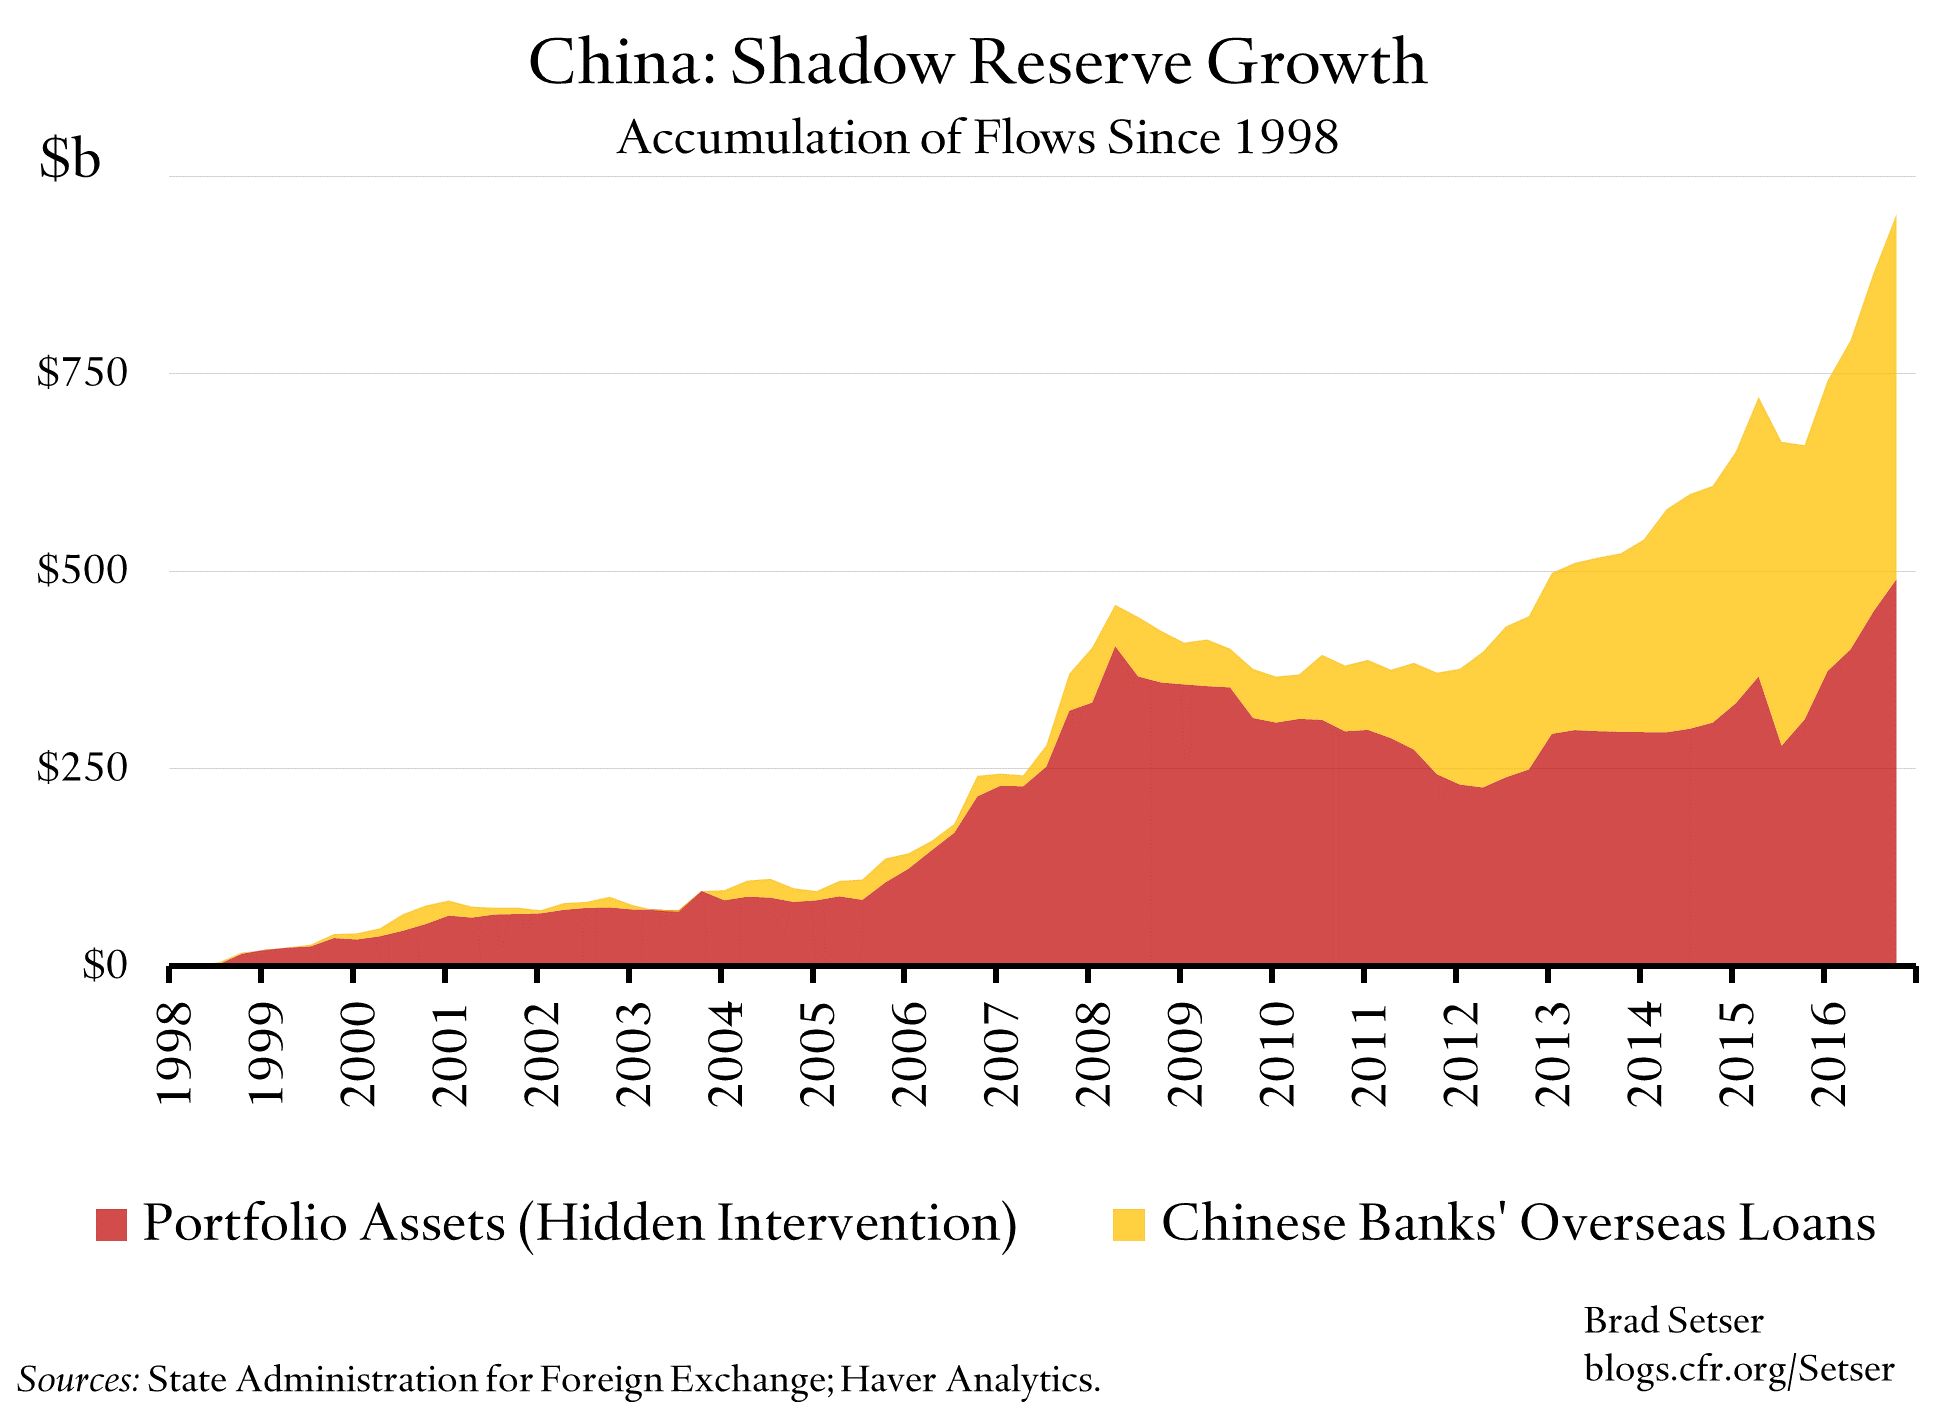 China's 2016 Reserve Loss Is More Manageable Than It Seems on First Glance